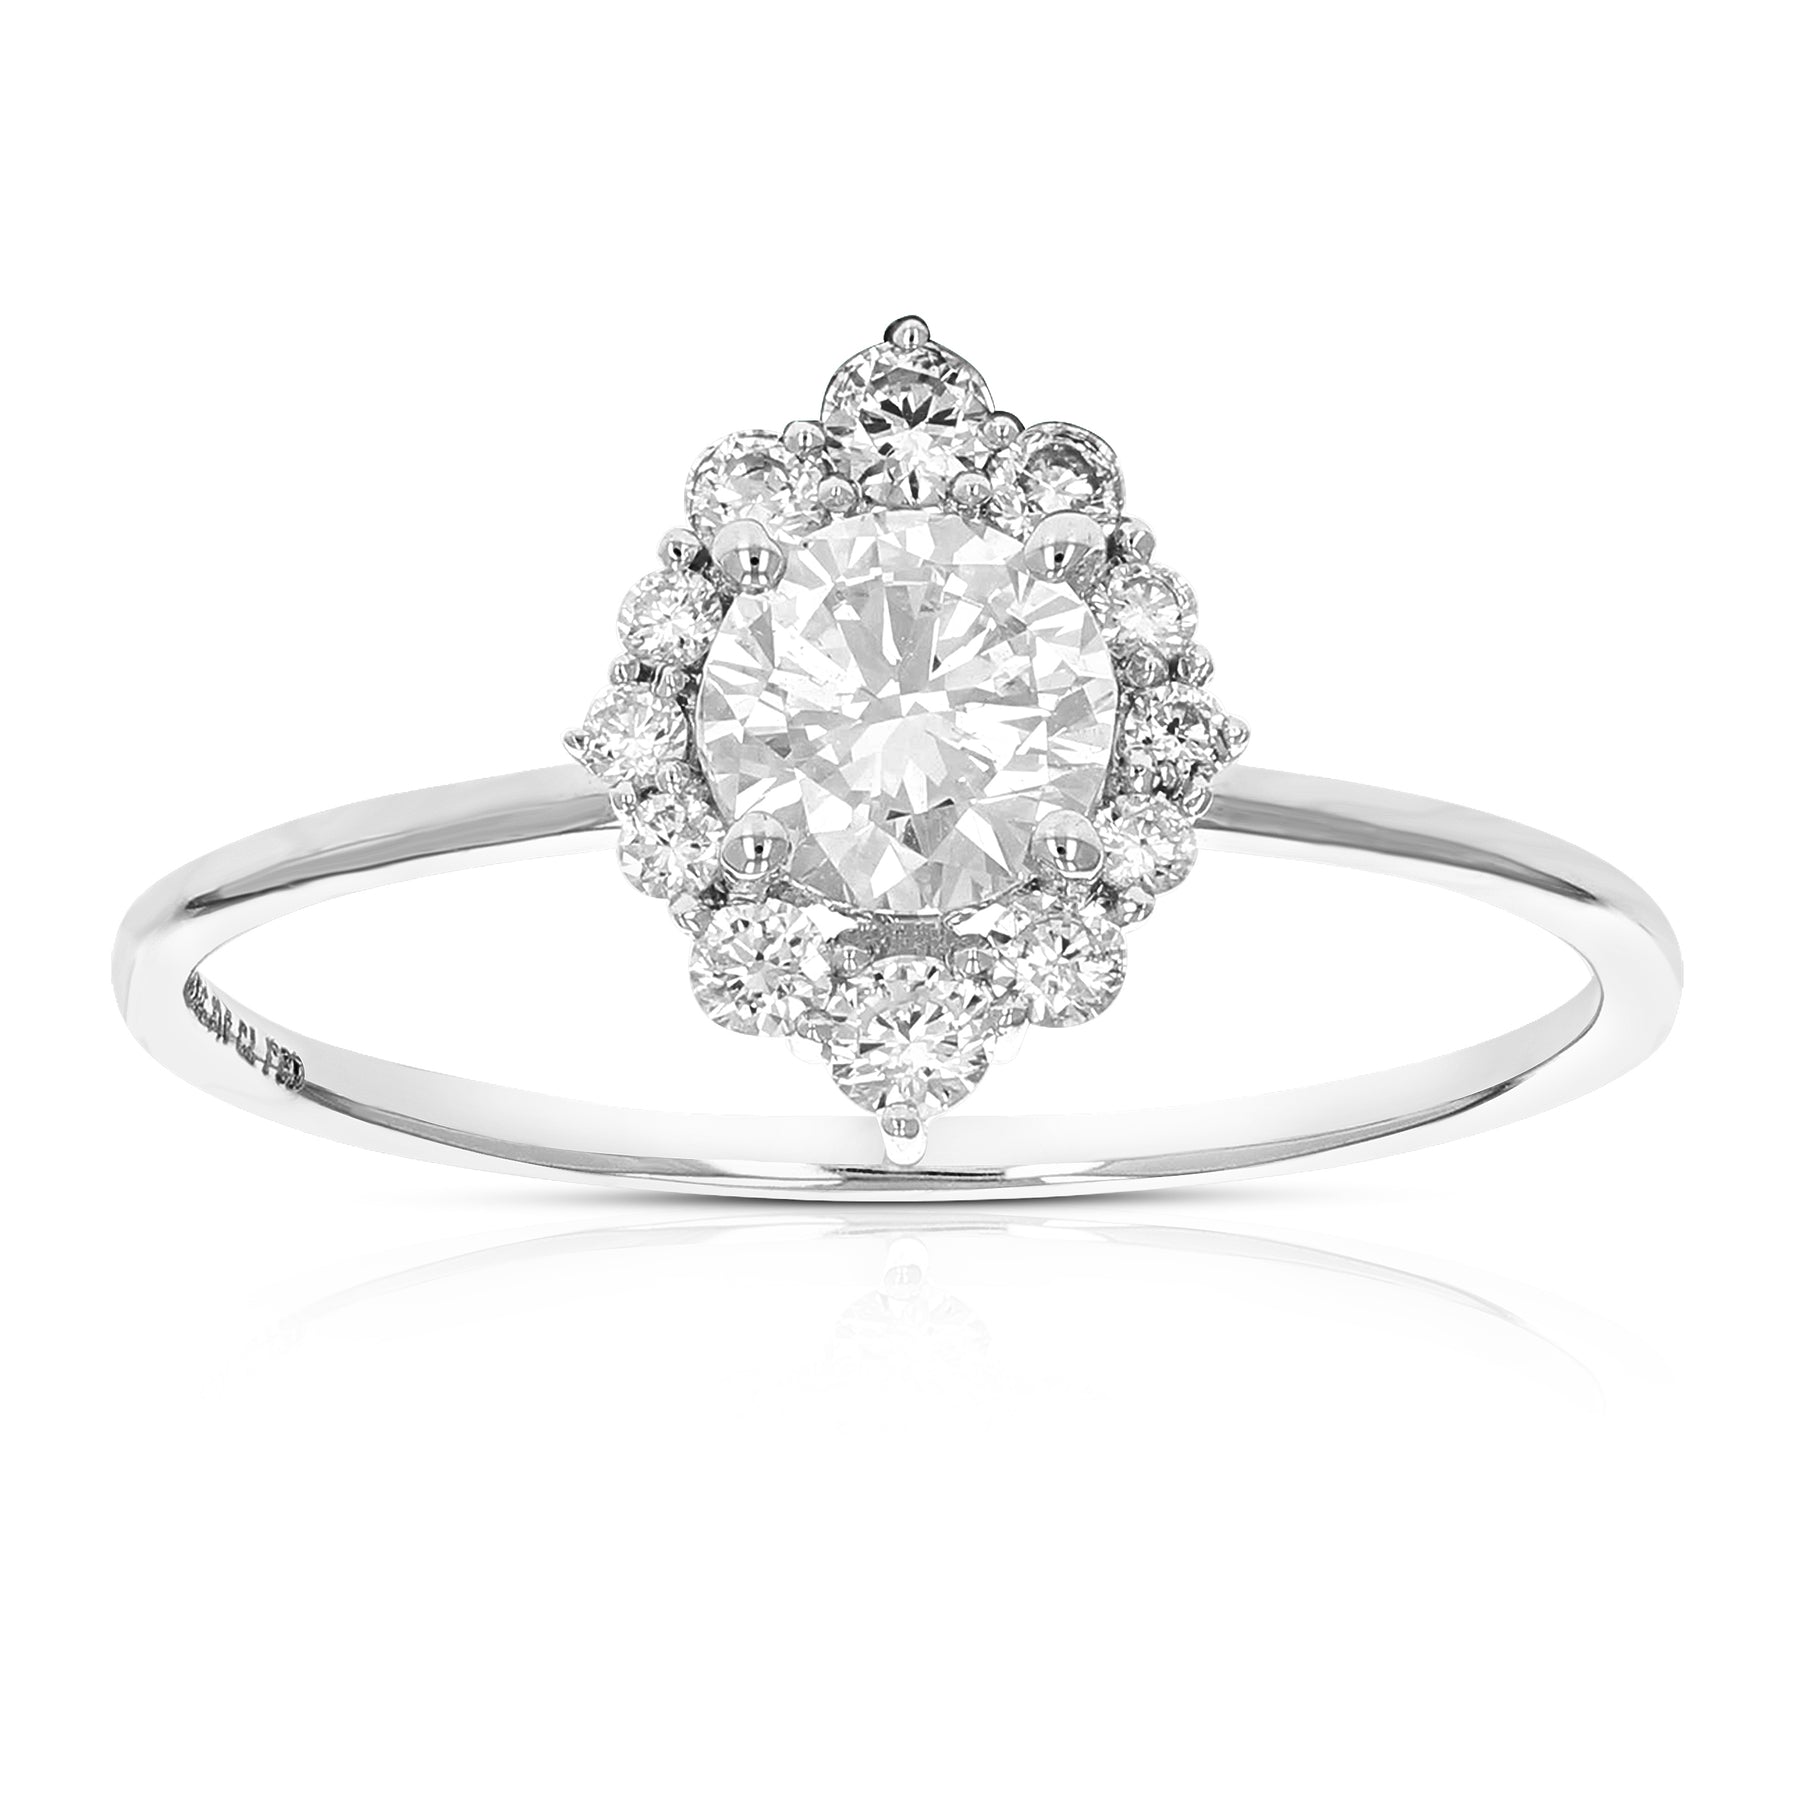 Vir Jewels 3/4 cttw Wedding Engagement Ring for Women, Round Lab Grown  Diamond Ring in 14K White Gold, Prong Setting